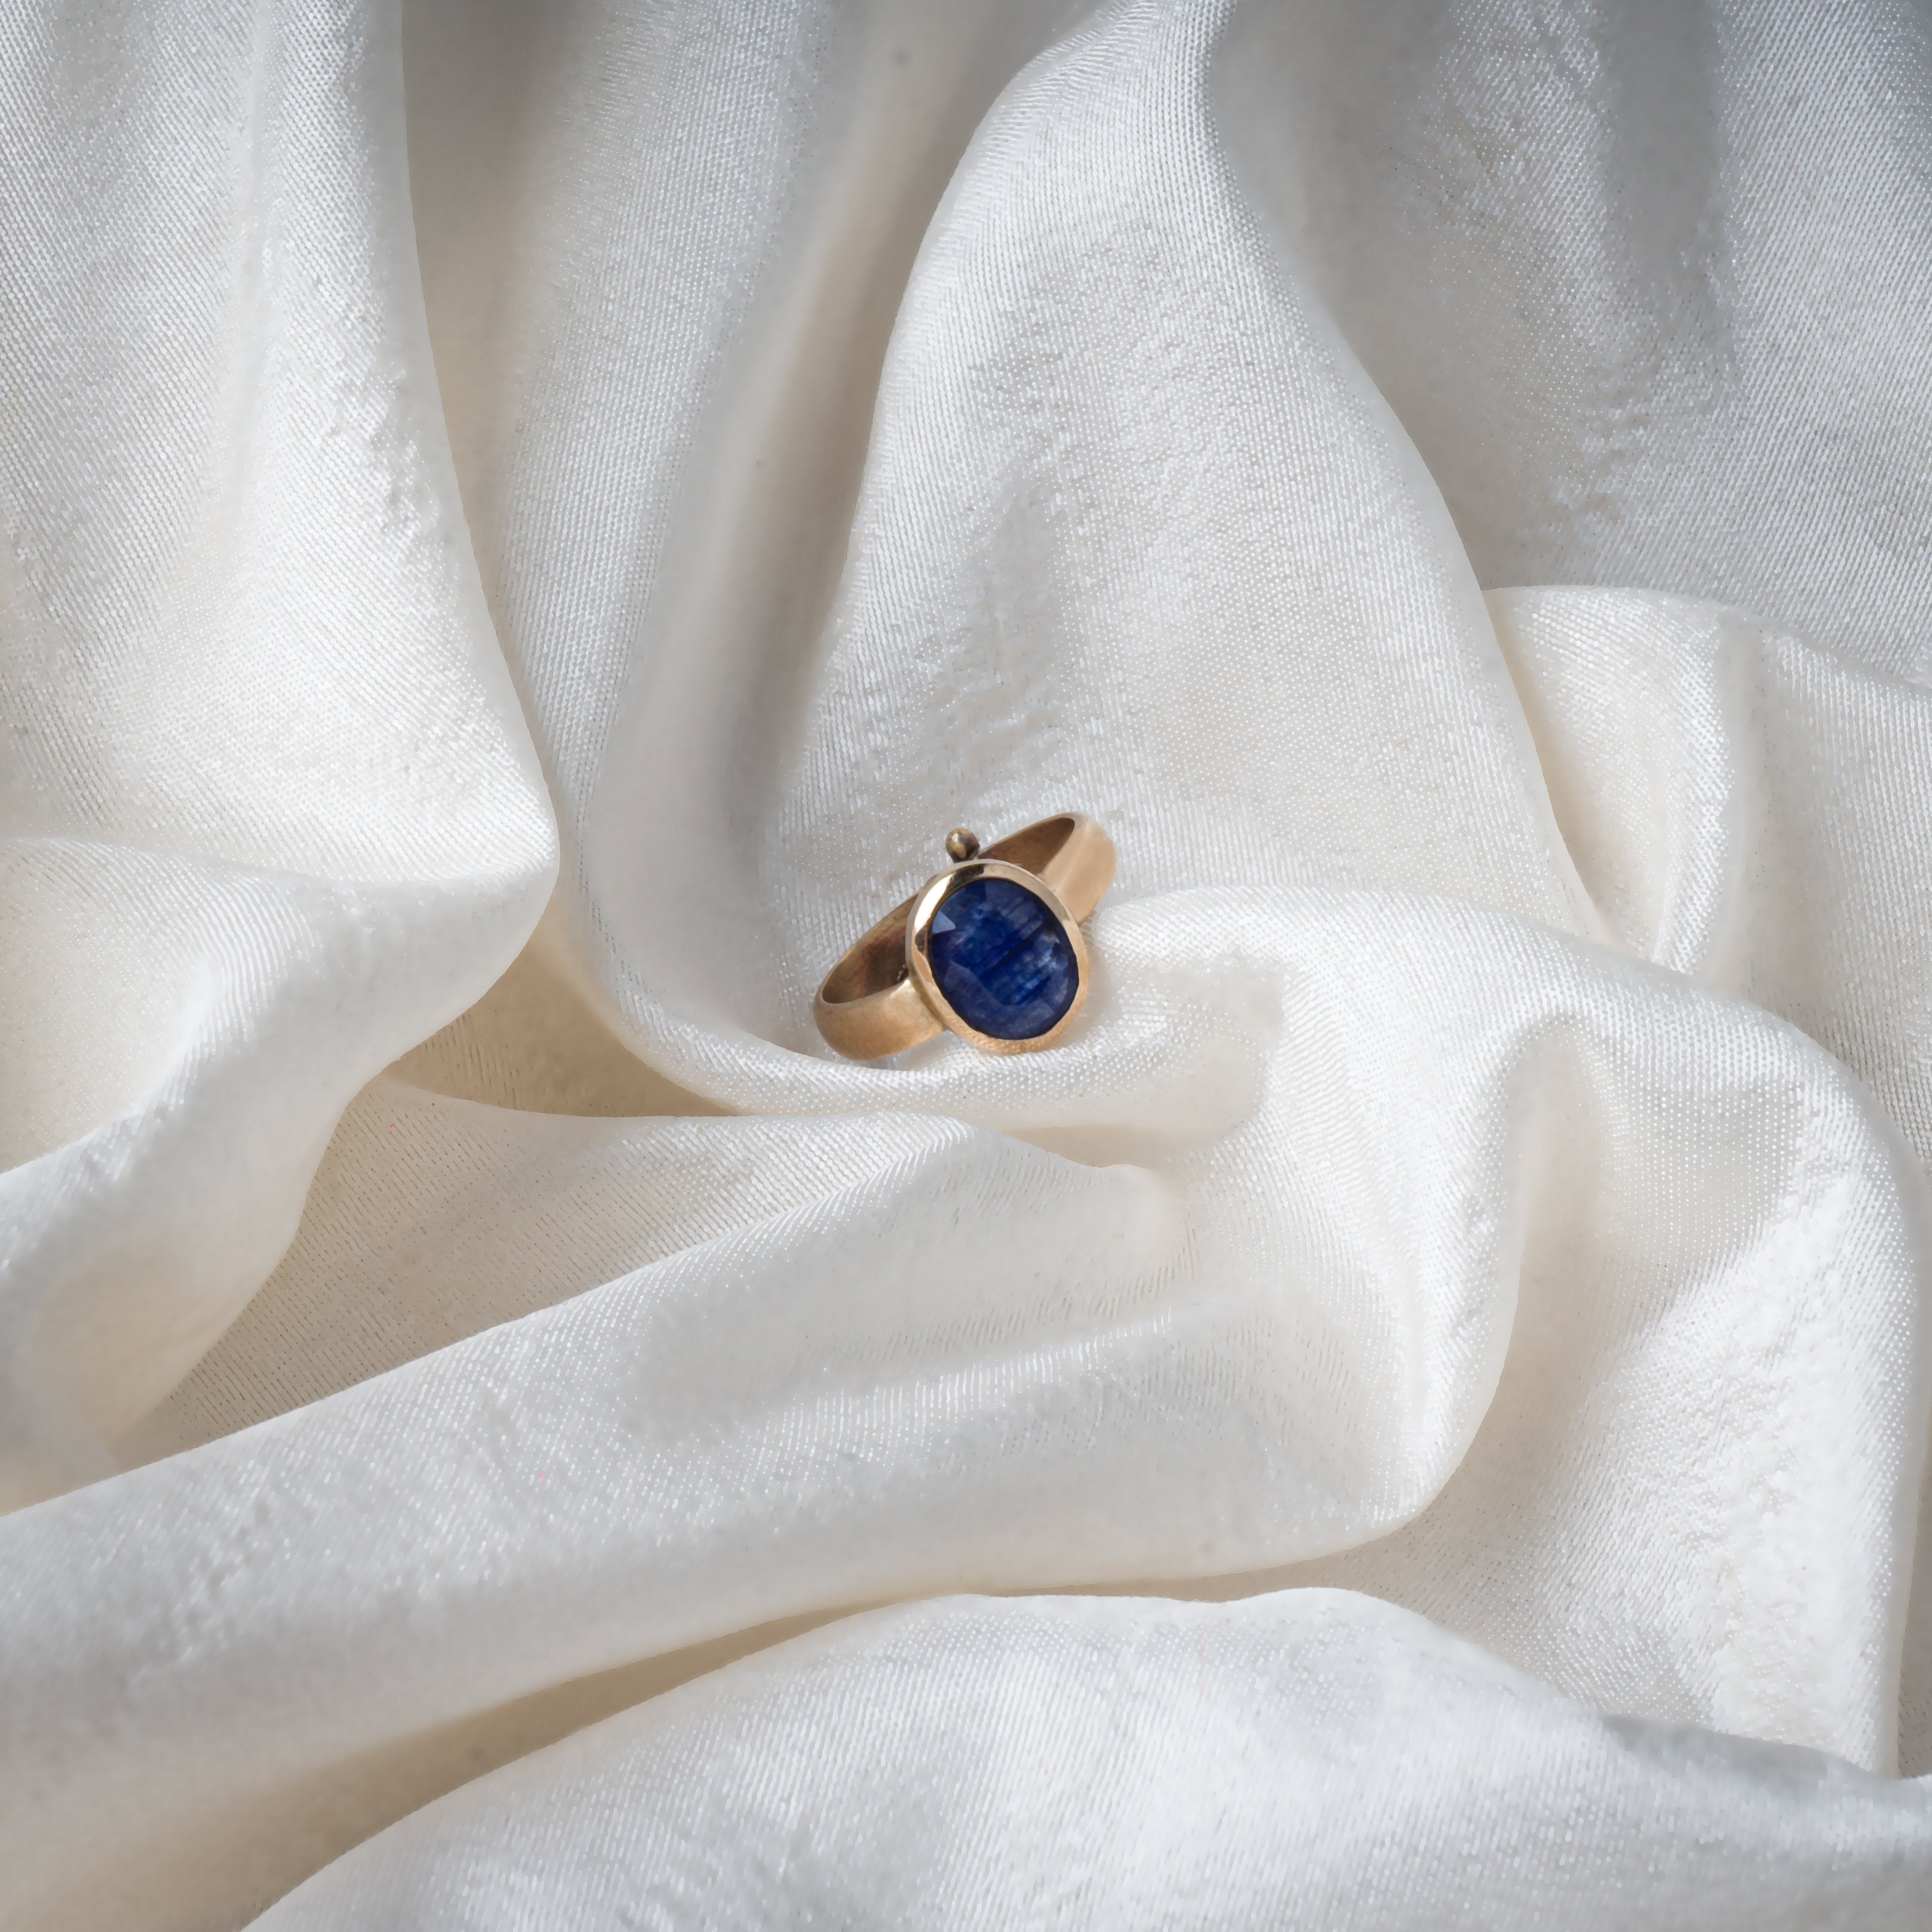 Blue Sapphire Engagement Ring: Princess Diana Engagement Ring